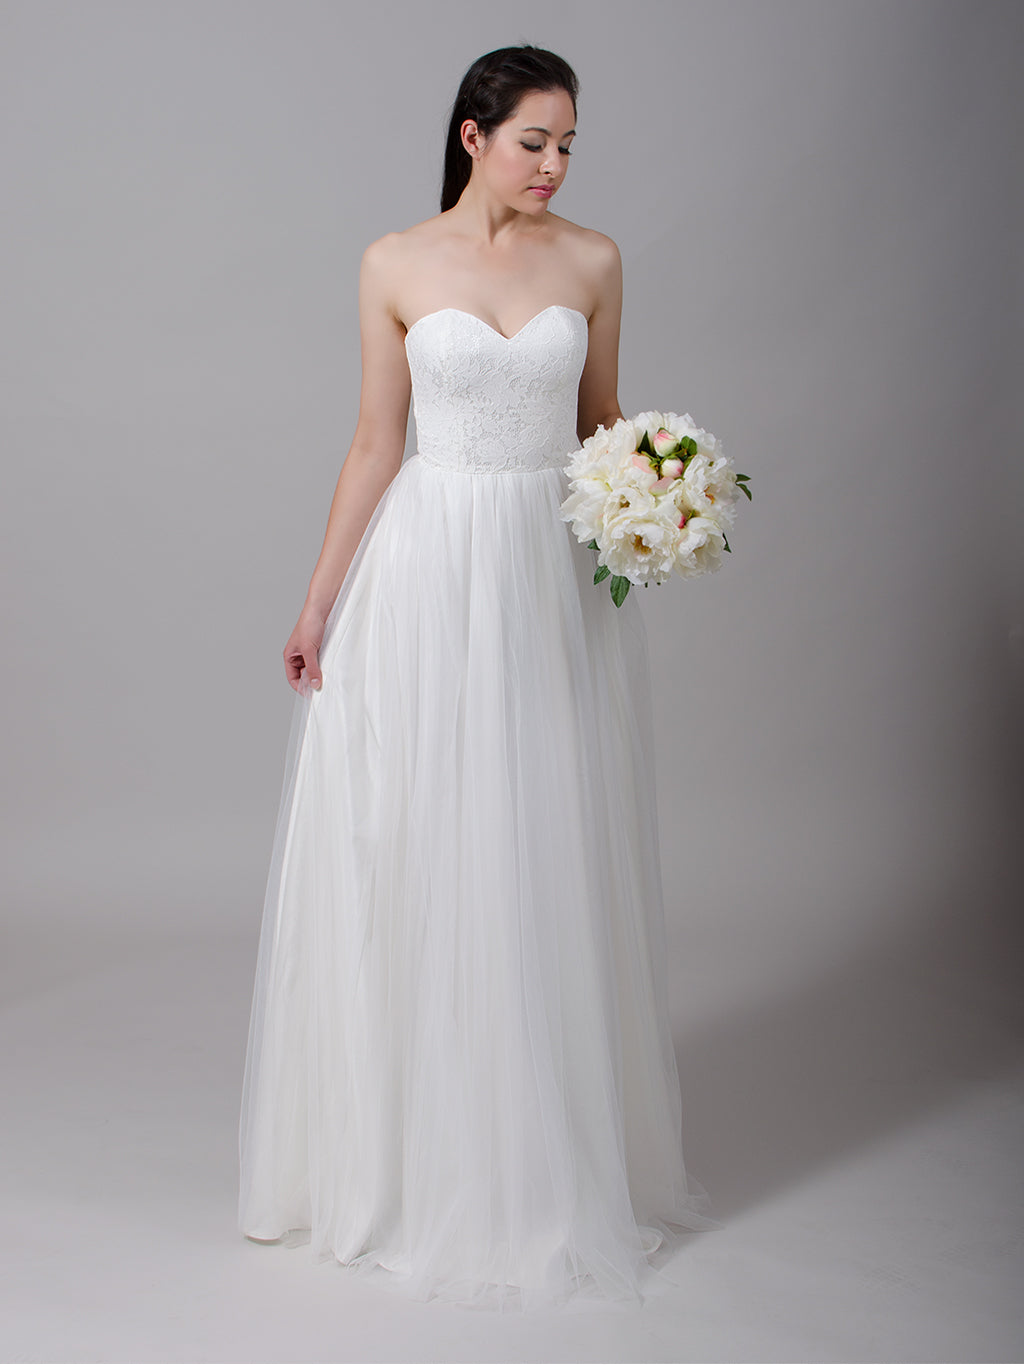 Ivory strapless lace wedding dress with tulle skirt 4022